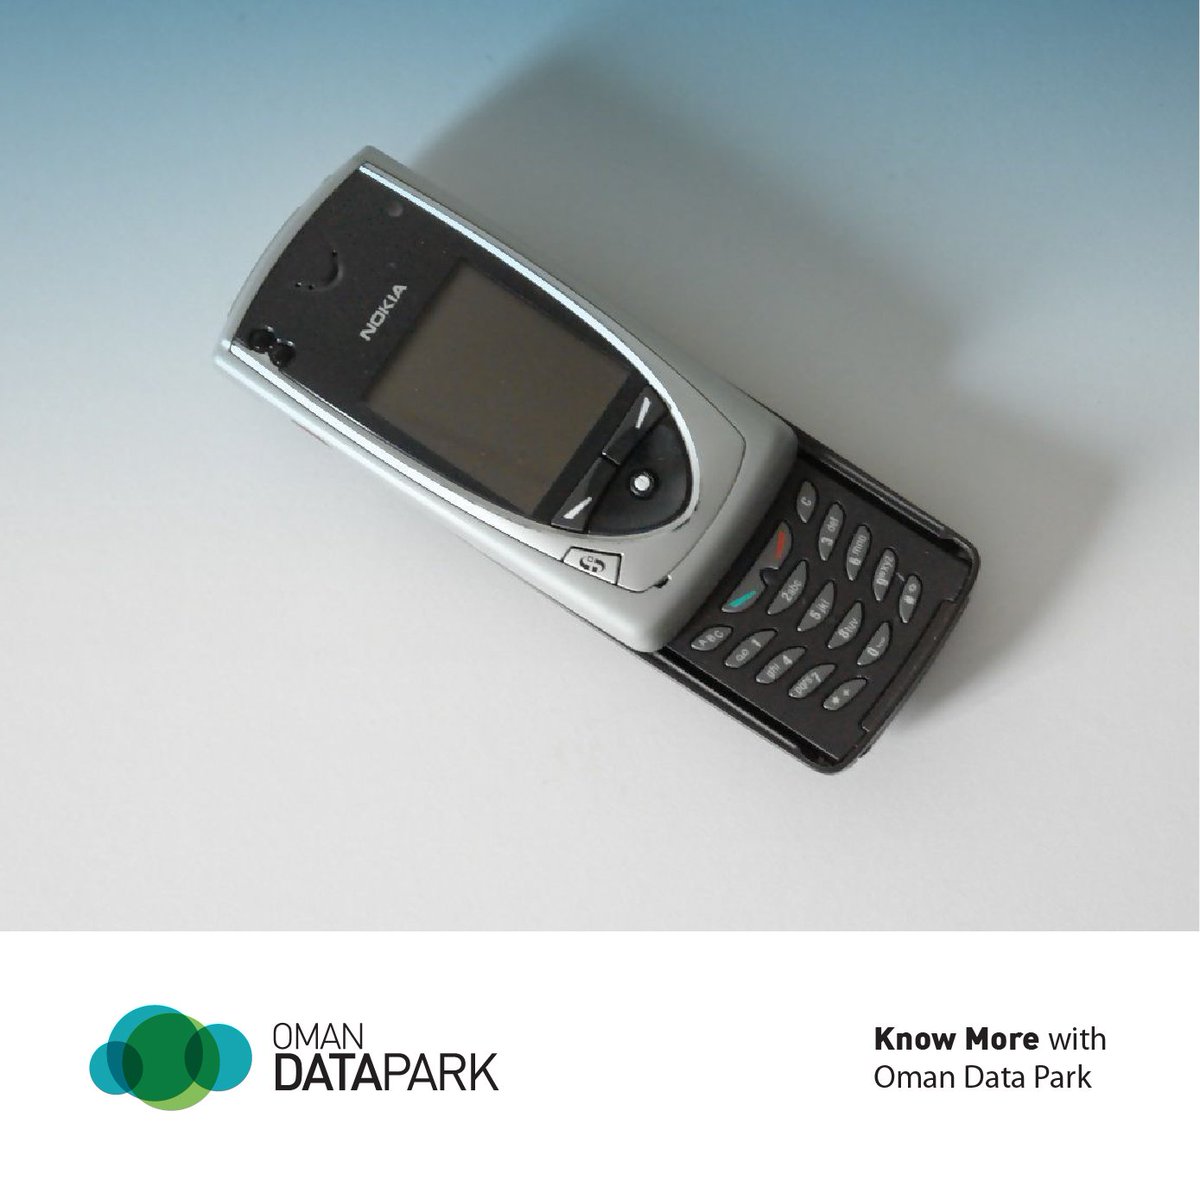 Oman Data Park In 01 Nokia Released Its First Ever Camera Phone And It Was Called Nokia 7650 According To Ceo Jorma Ollila It Was The Most Important Launch Of That